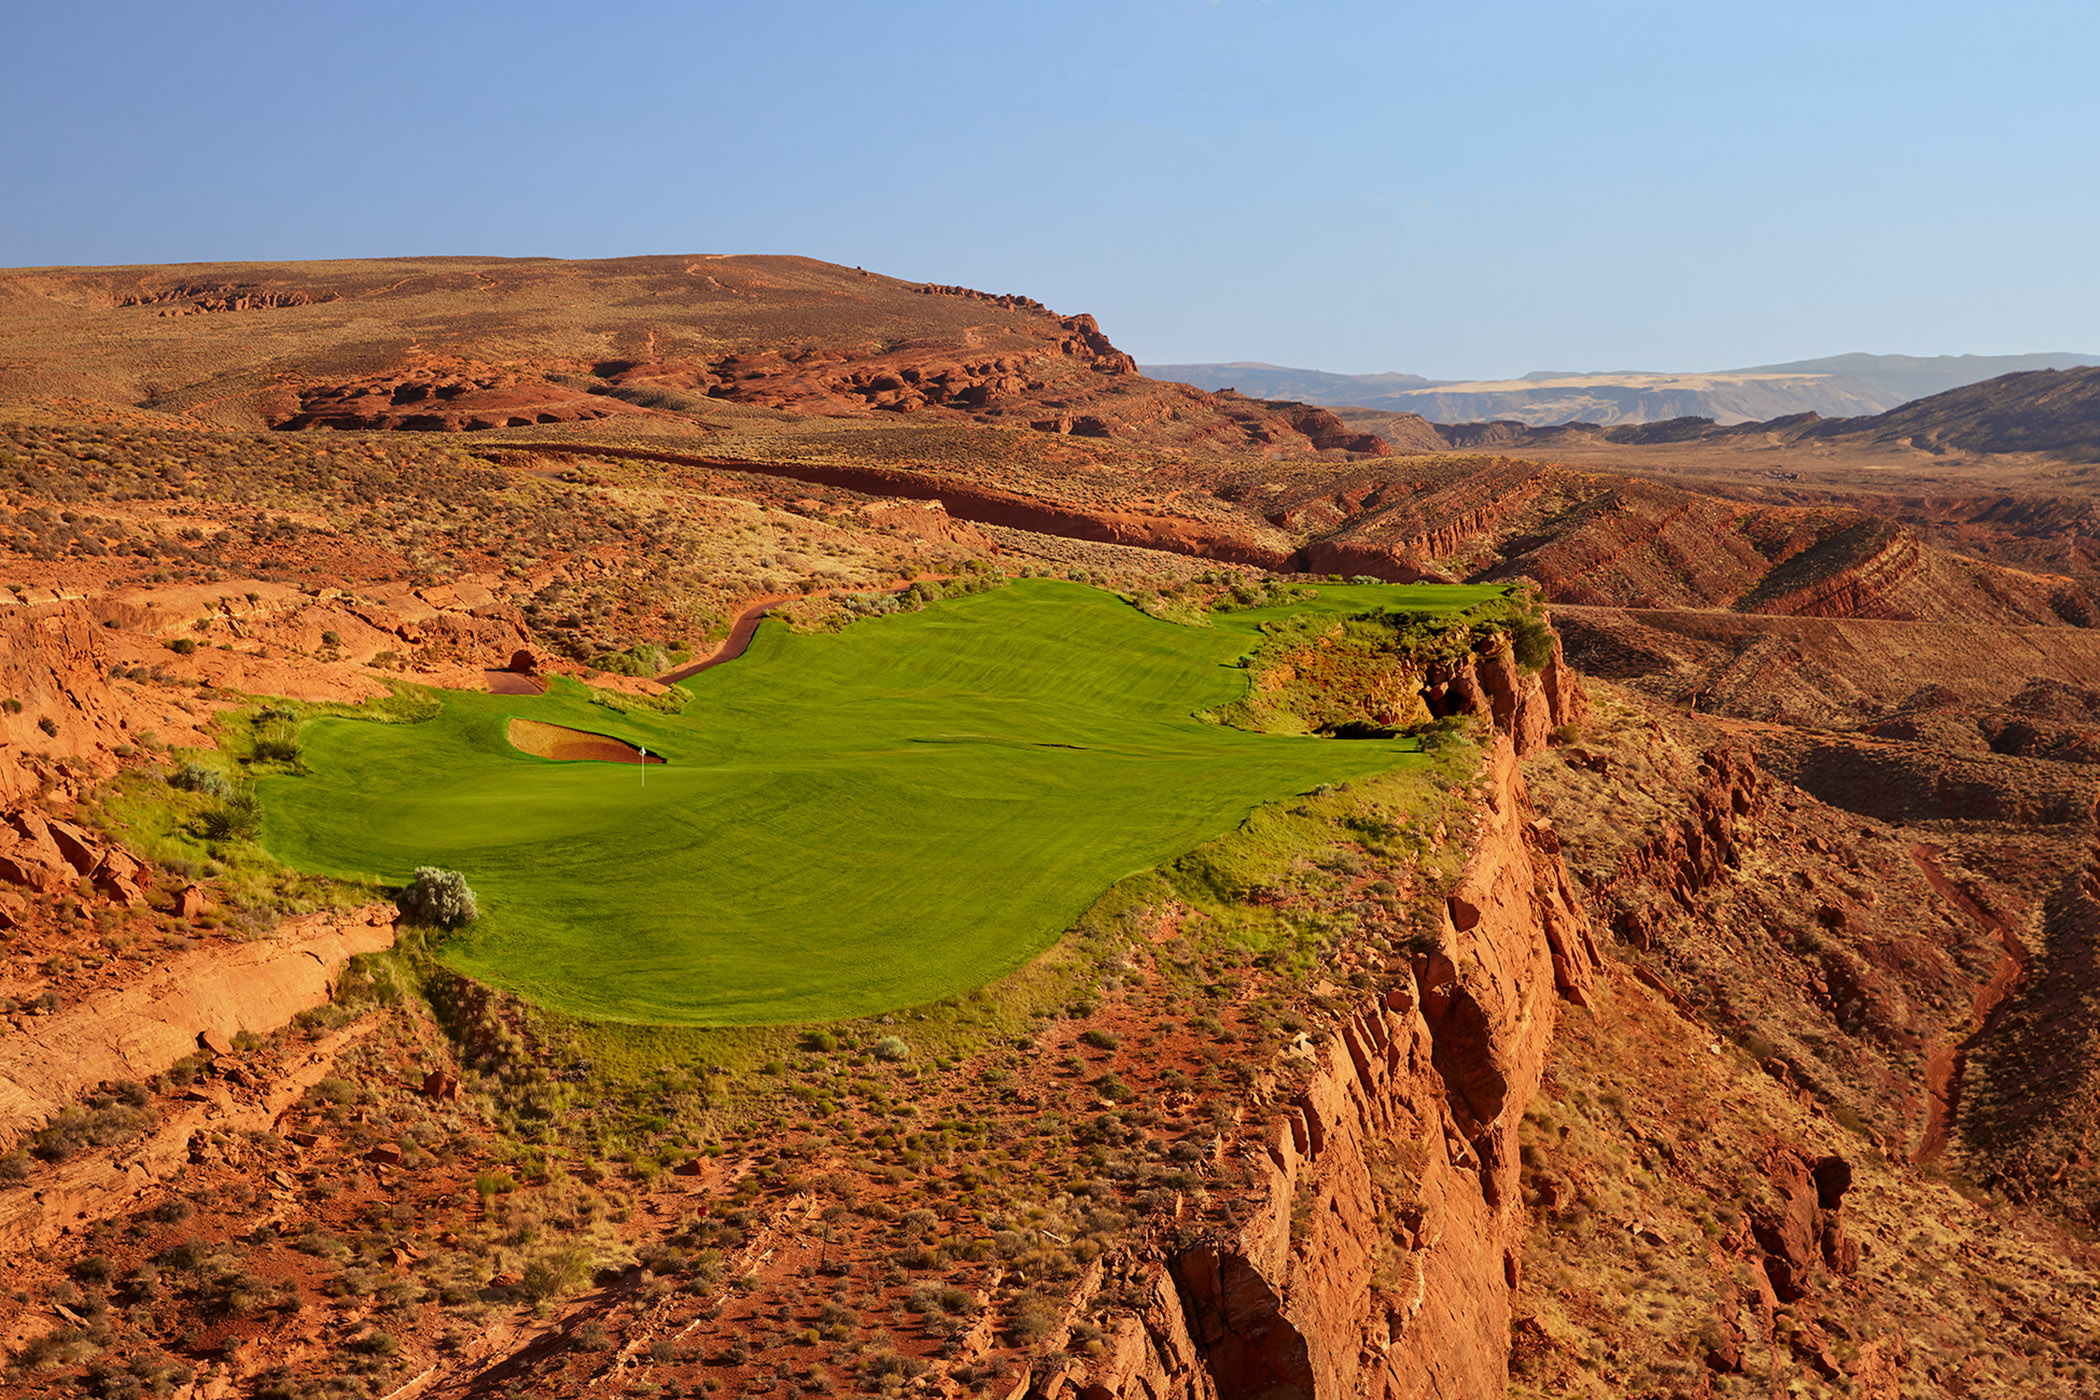 Sand Hollow Golf Course & Resort  - Stephen Denton Photography, Los Angeles, California based Architectural, Hospitality, & Aerial Photographer 